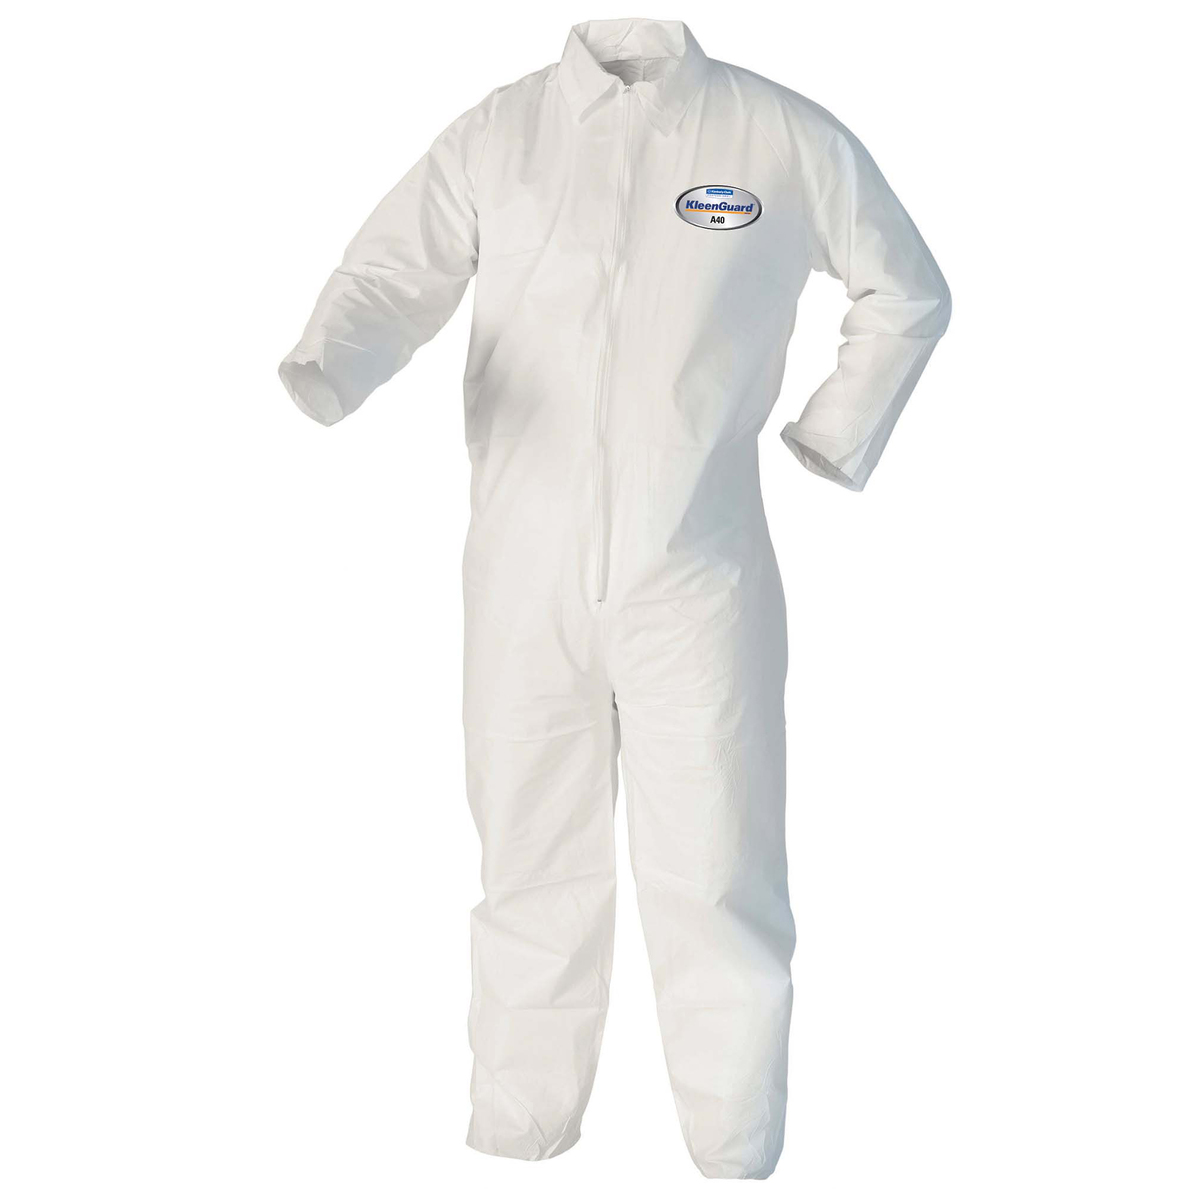 Kimberly-Clark Professional™ 3X White KleenGuard™ A40 Film Laminate Disposable Coveralls (Availability restrictions apply.)